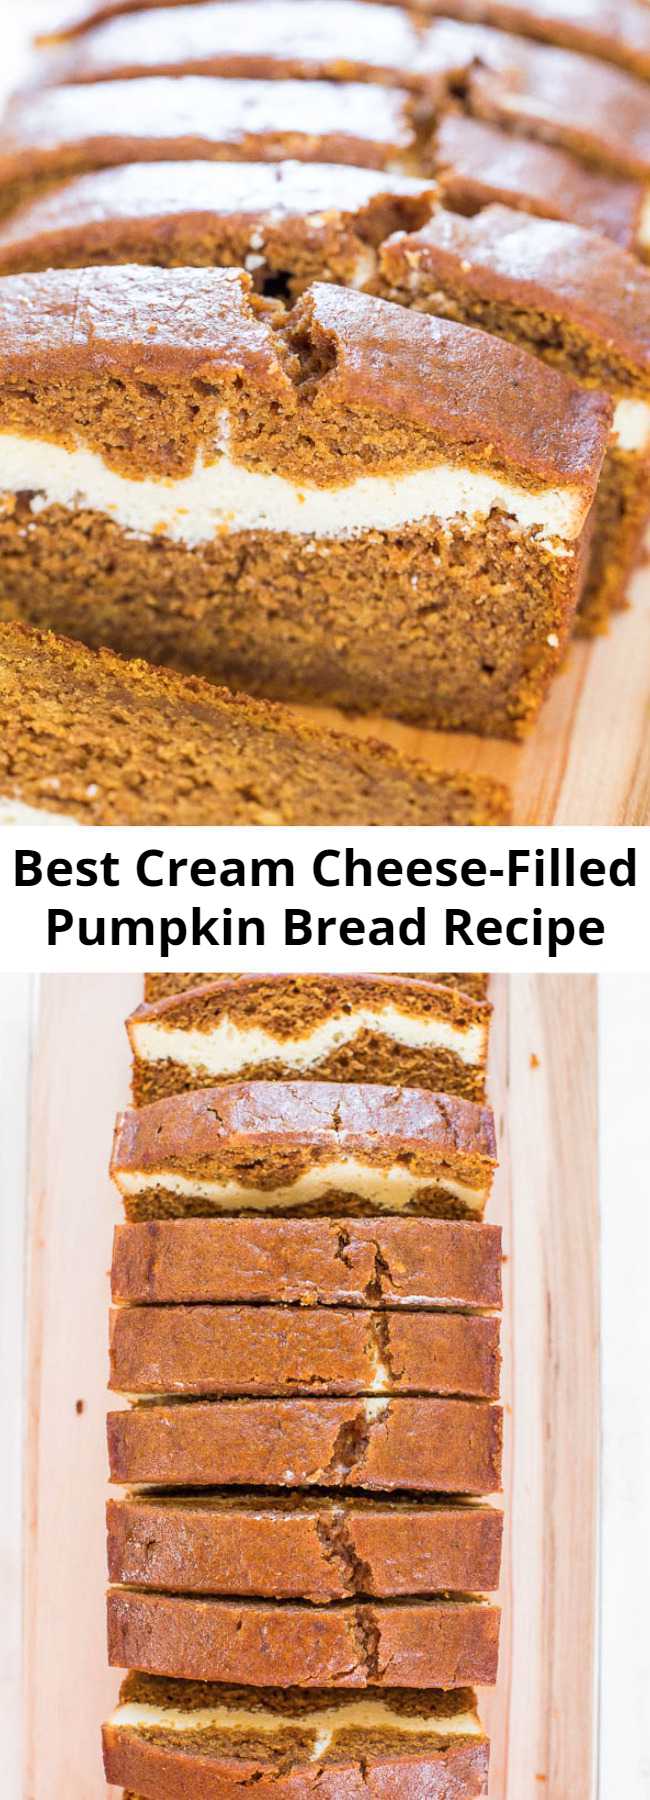 Best Cream Cheese-Filled Pumpkin Bread Recipe - This is without a doubt the BEST pumpkin bread recipe! This pumpkin cream cheese bread tastes like it has cheesecake baked into the middle. You’ll definitely want a second slice! #pumpkindesserts #pumpkinrecipes